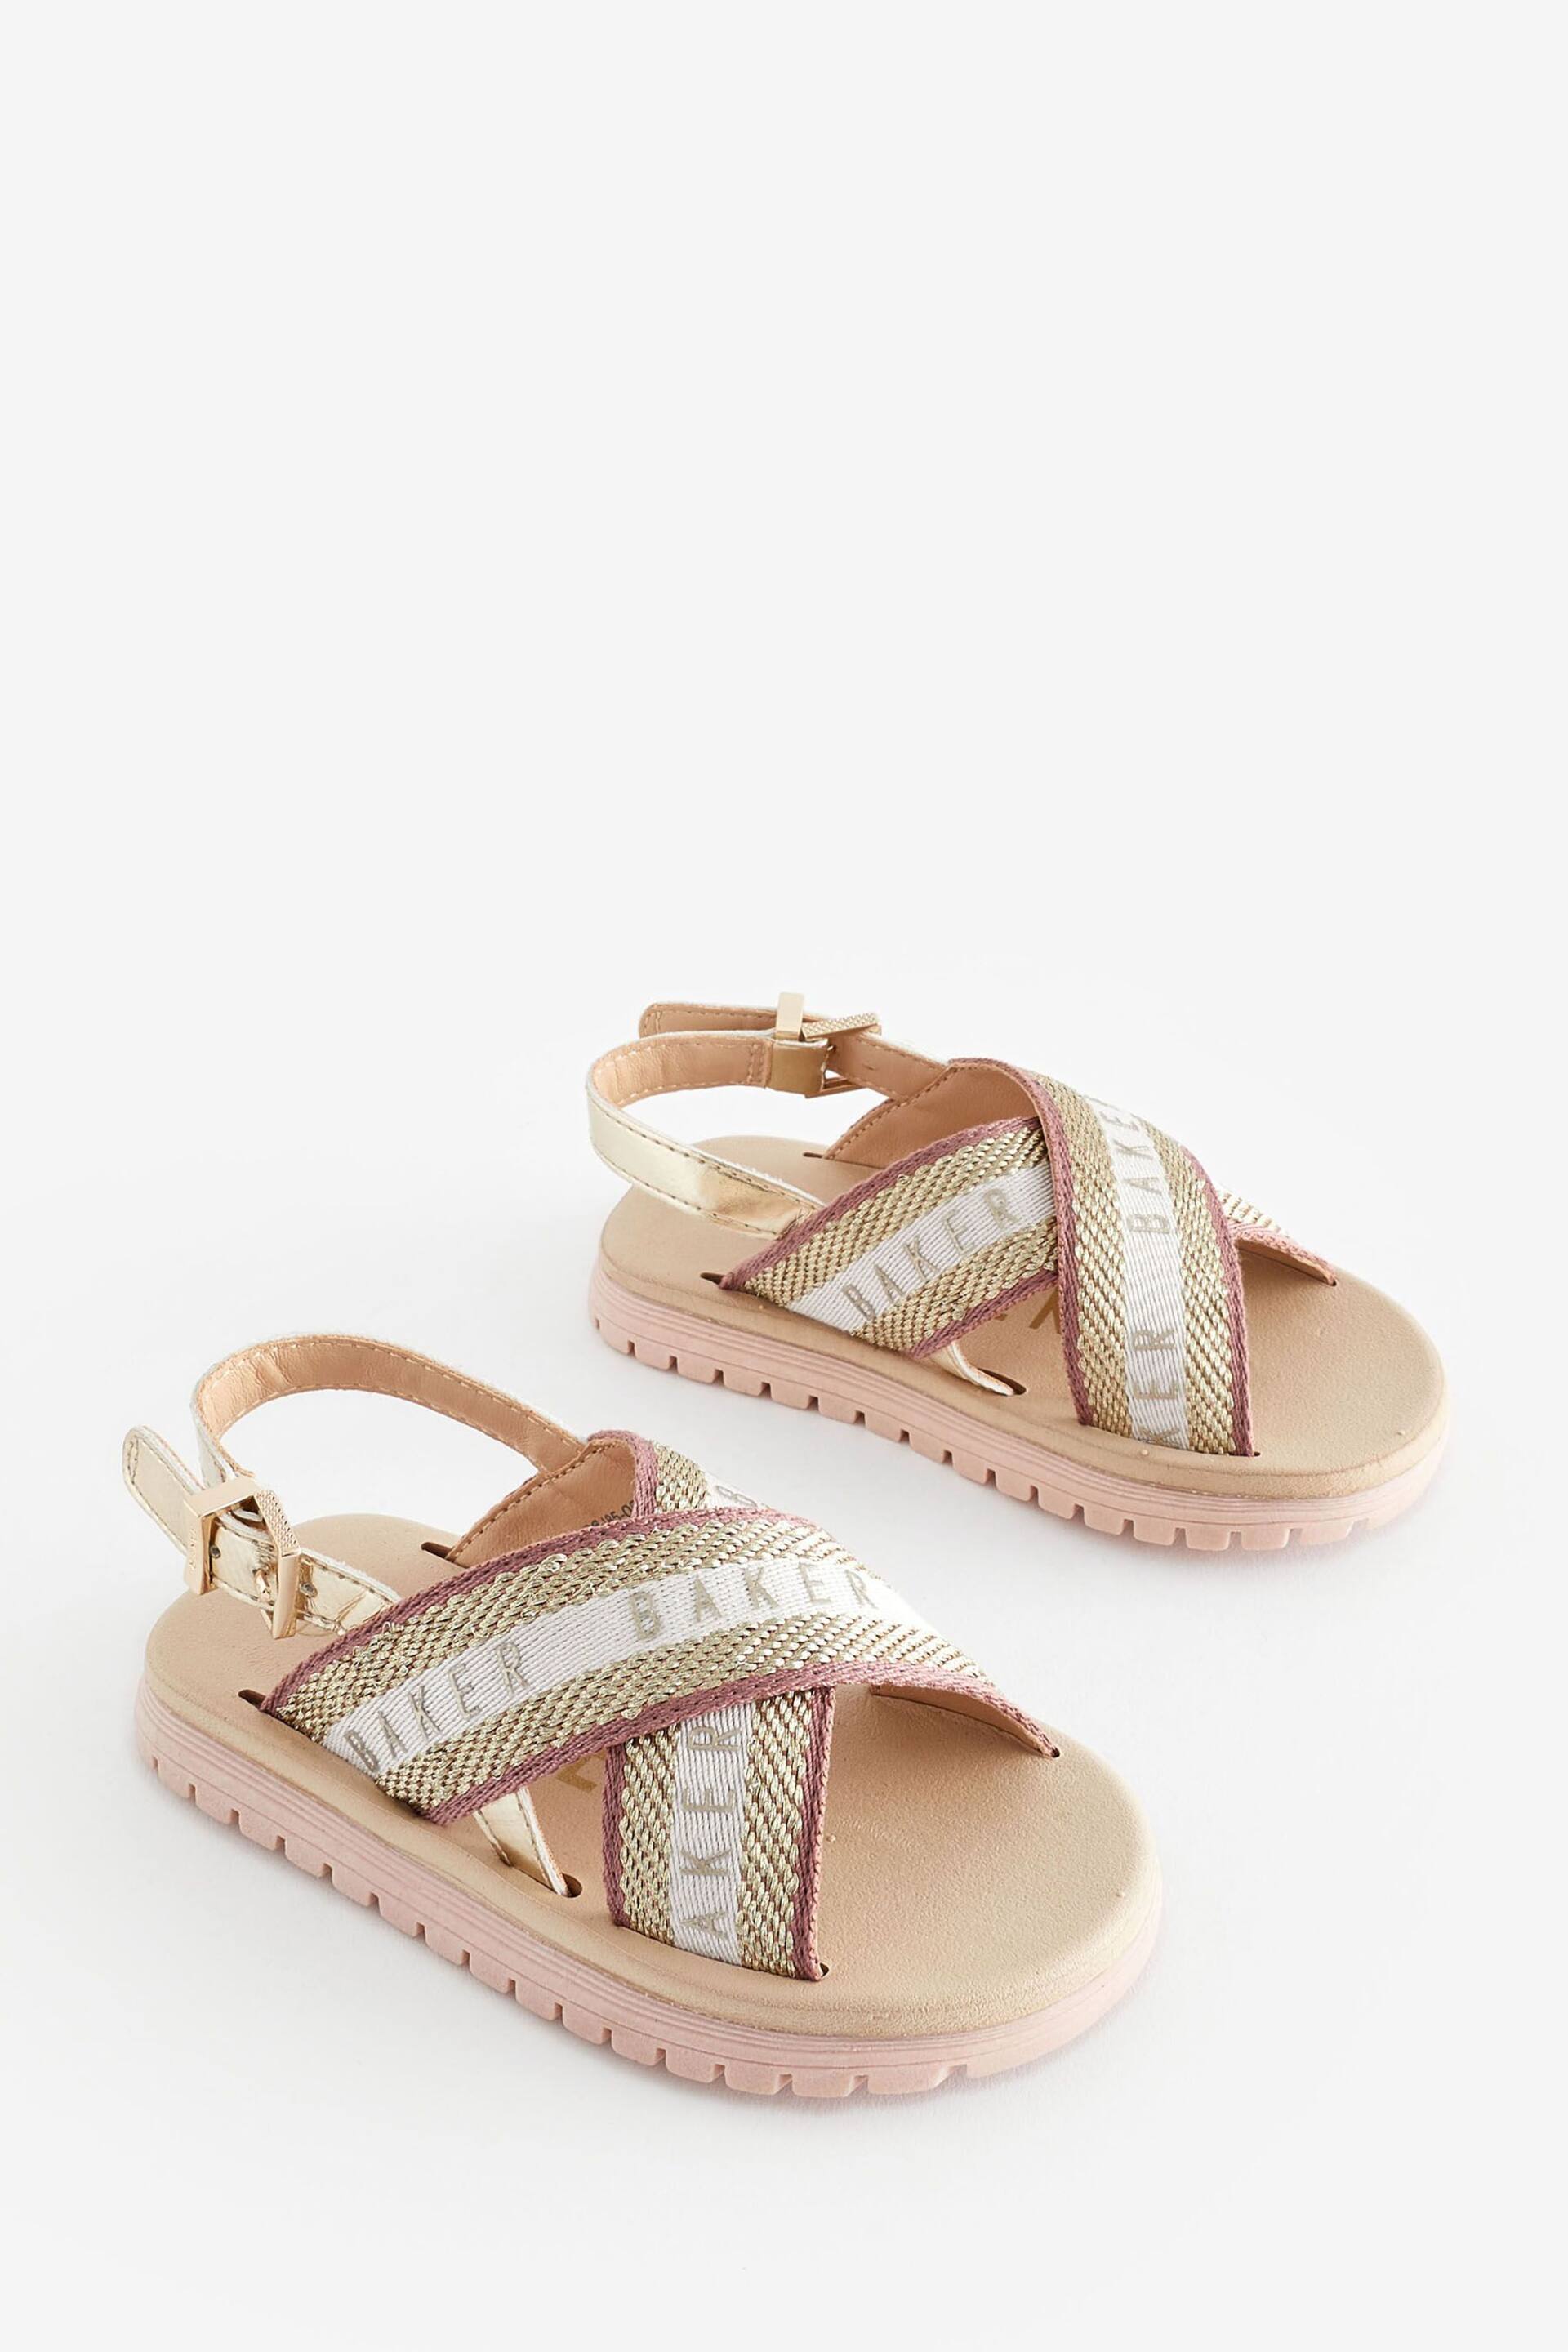 Baker by Ted Baker Girls Woven and Metallic Wedge Sandals - Image 1 of 6